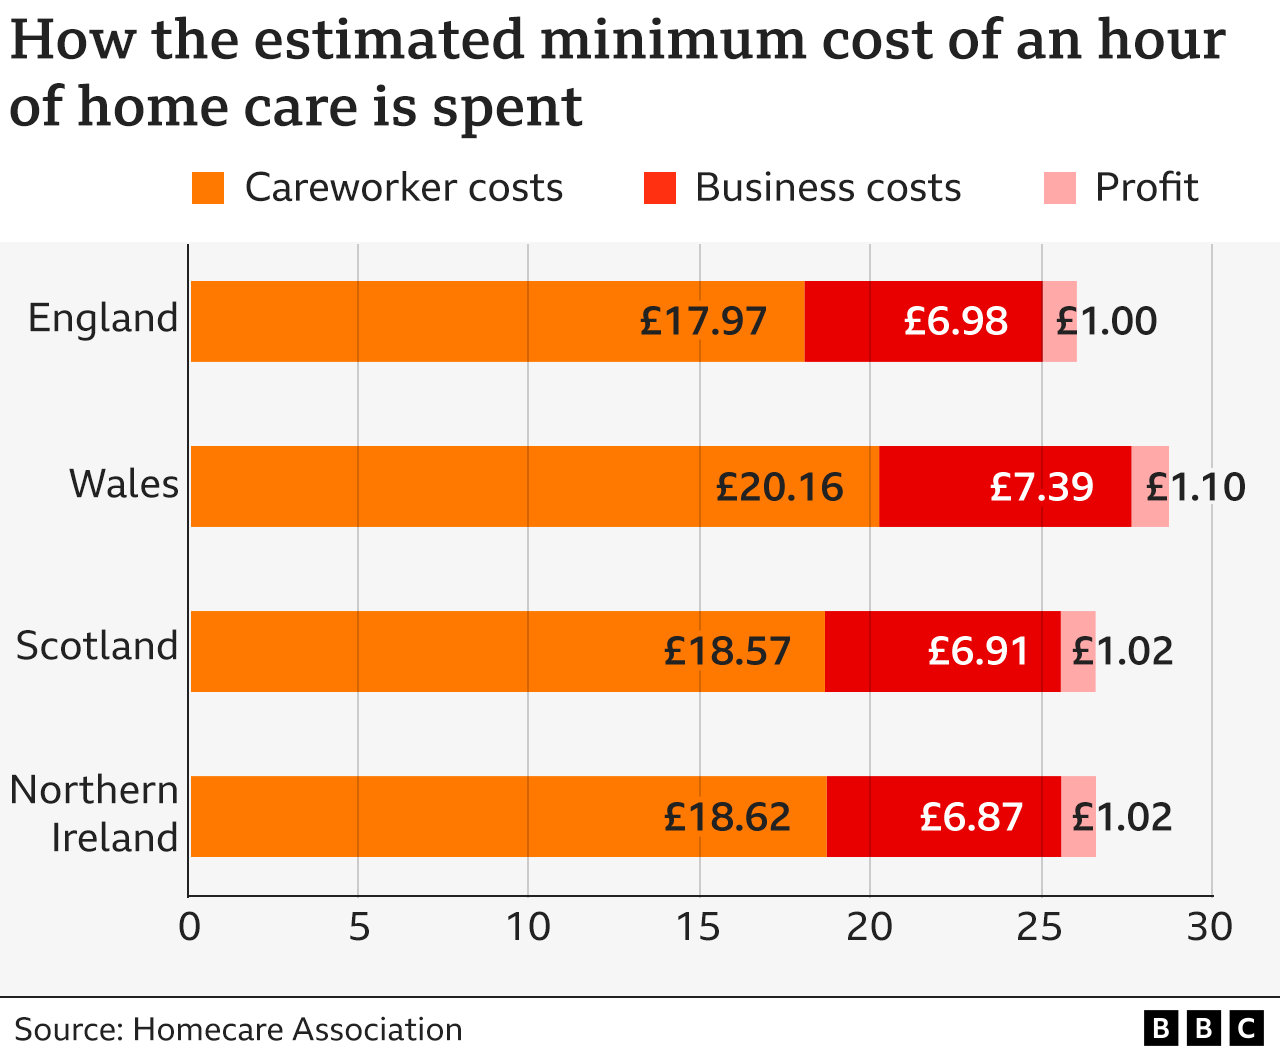 How estimated minimum cost of an hour of home care is spent